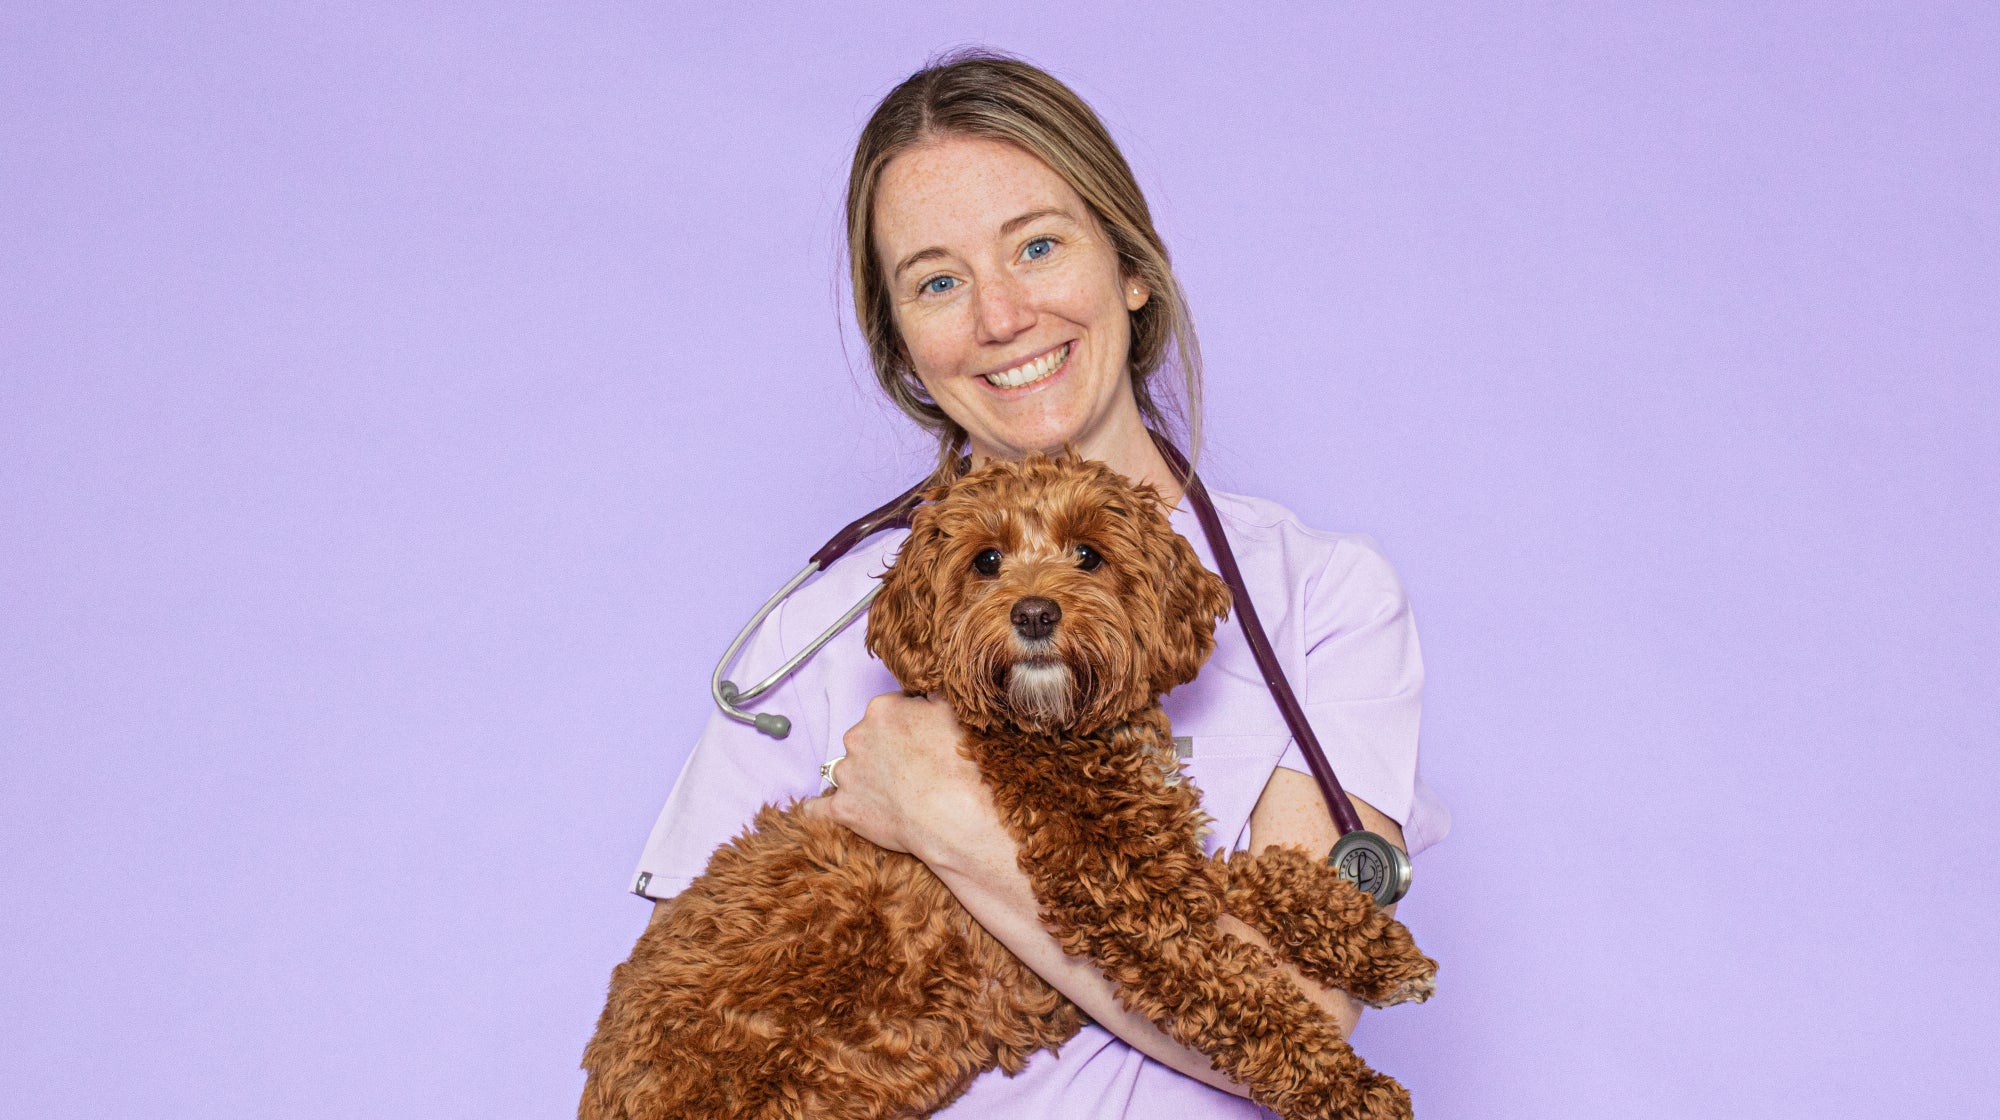 vet linda holding a cockapoo on a lilac background